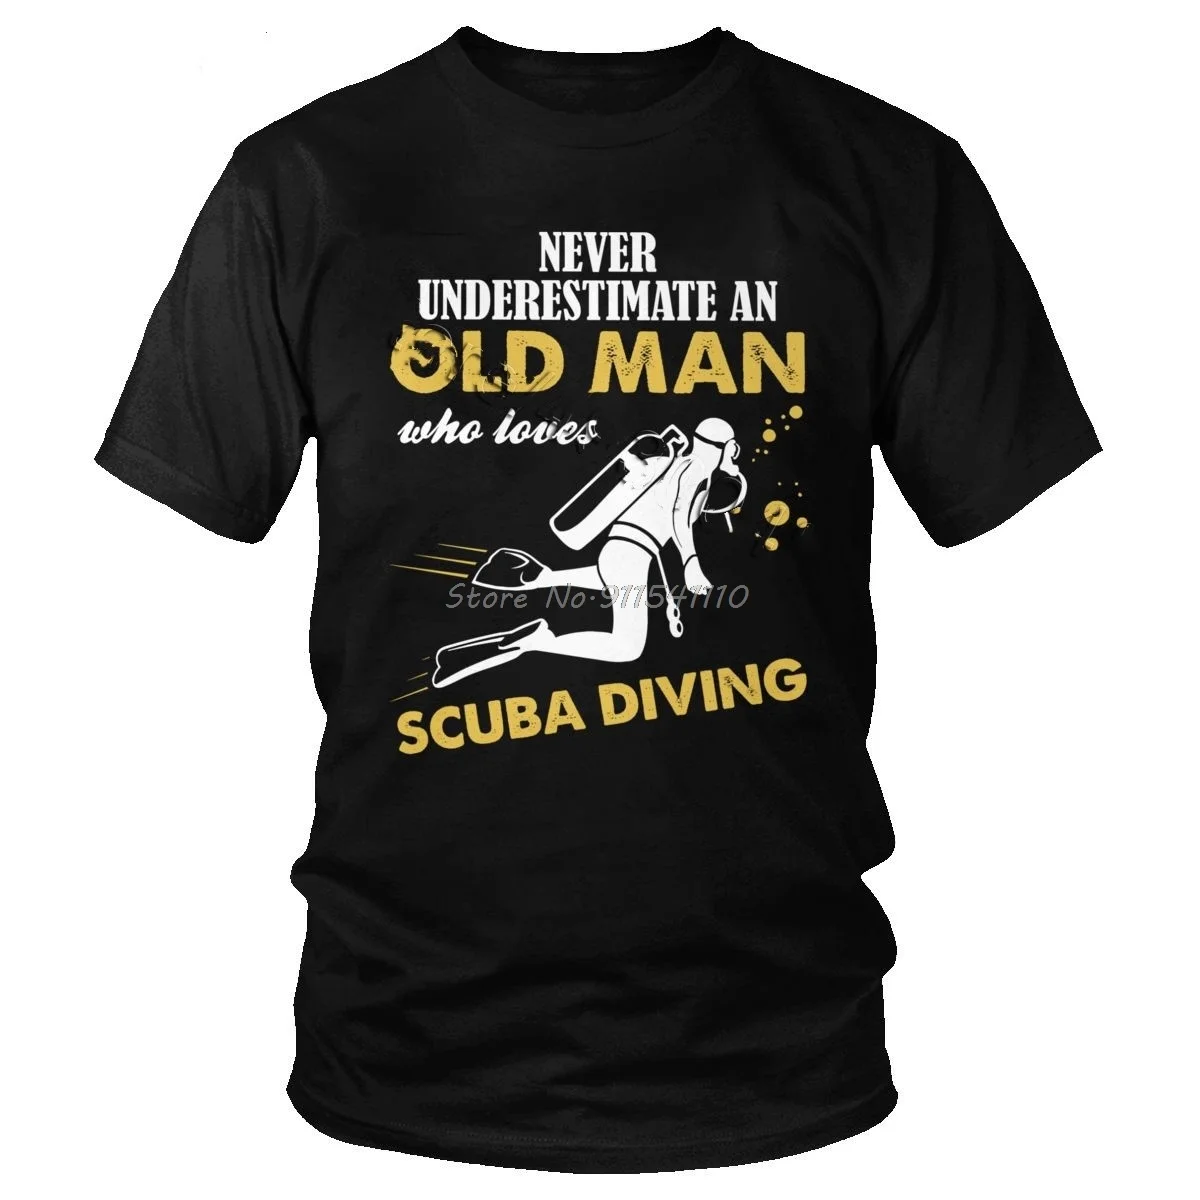 

Never Underestimate An Old Man Who Loves Scuba Diving T-Shirt Men Cotton Short Sleeve Tshirt Dive Quote Tee For Diver Lover Gift